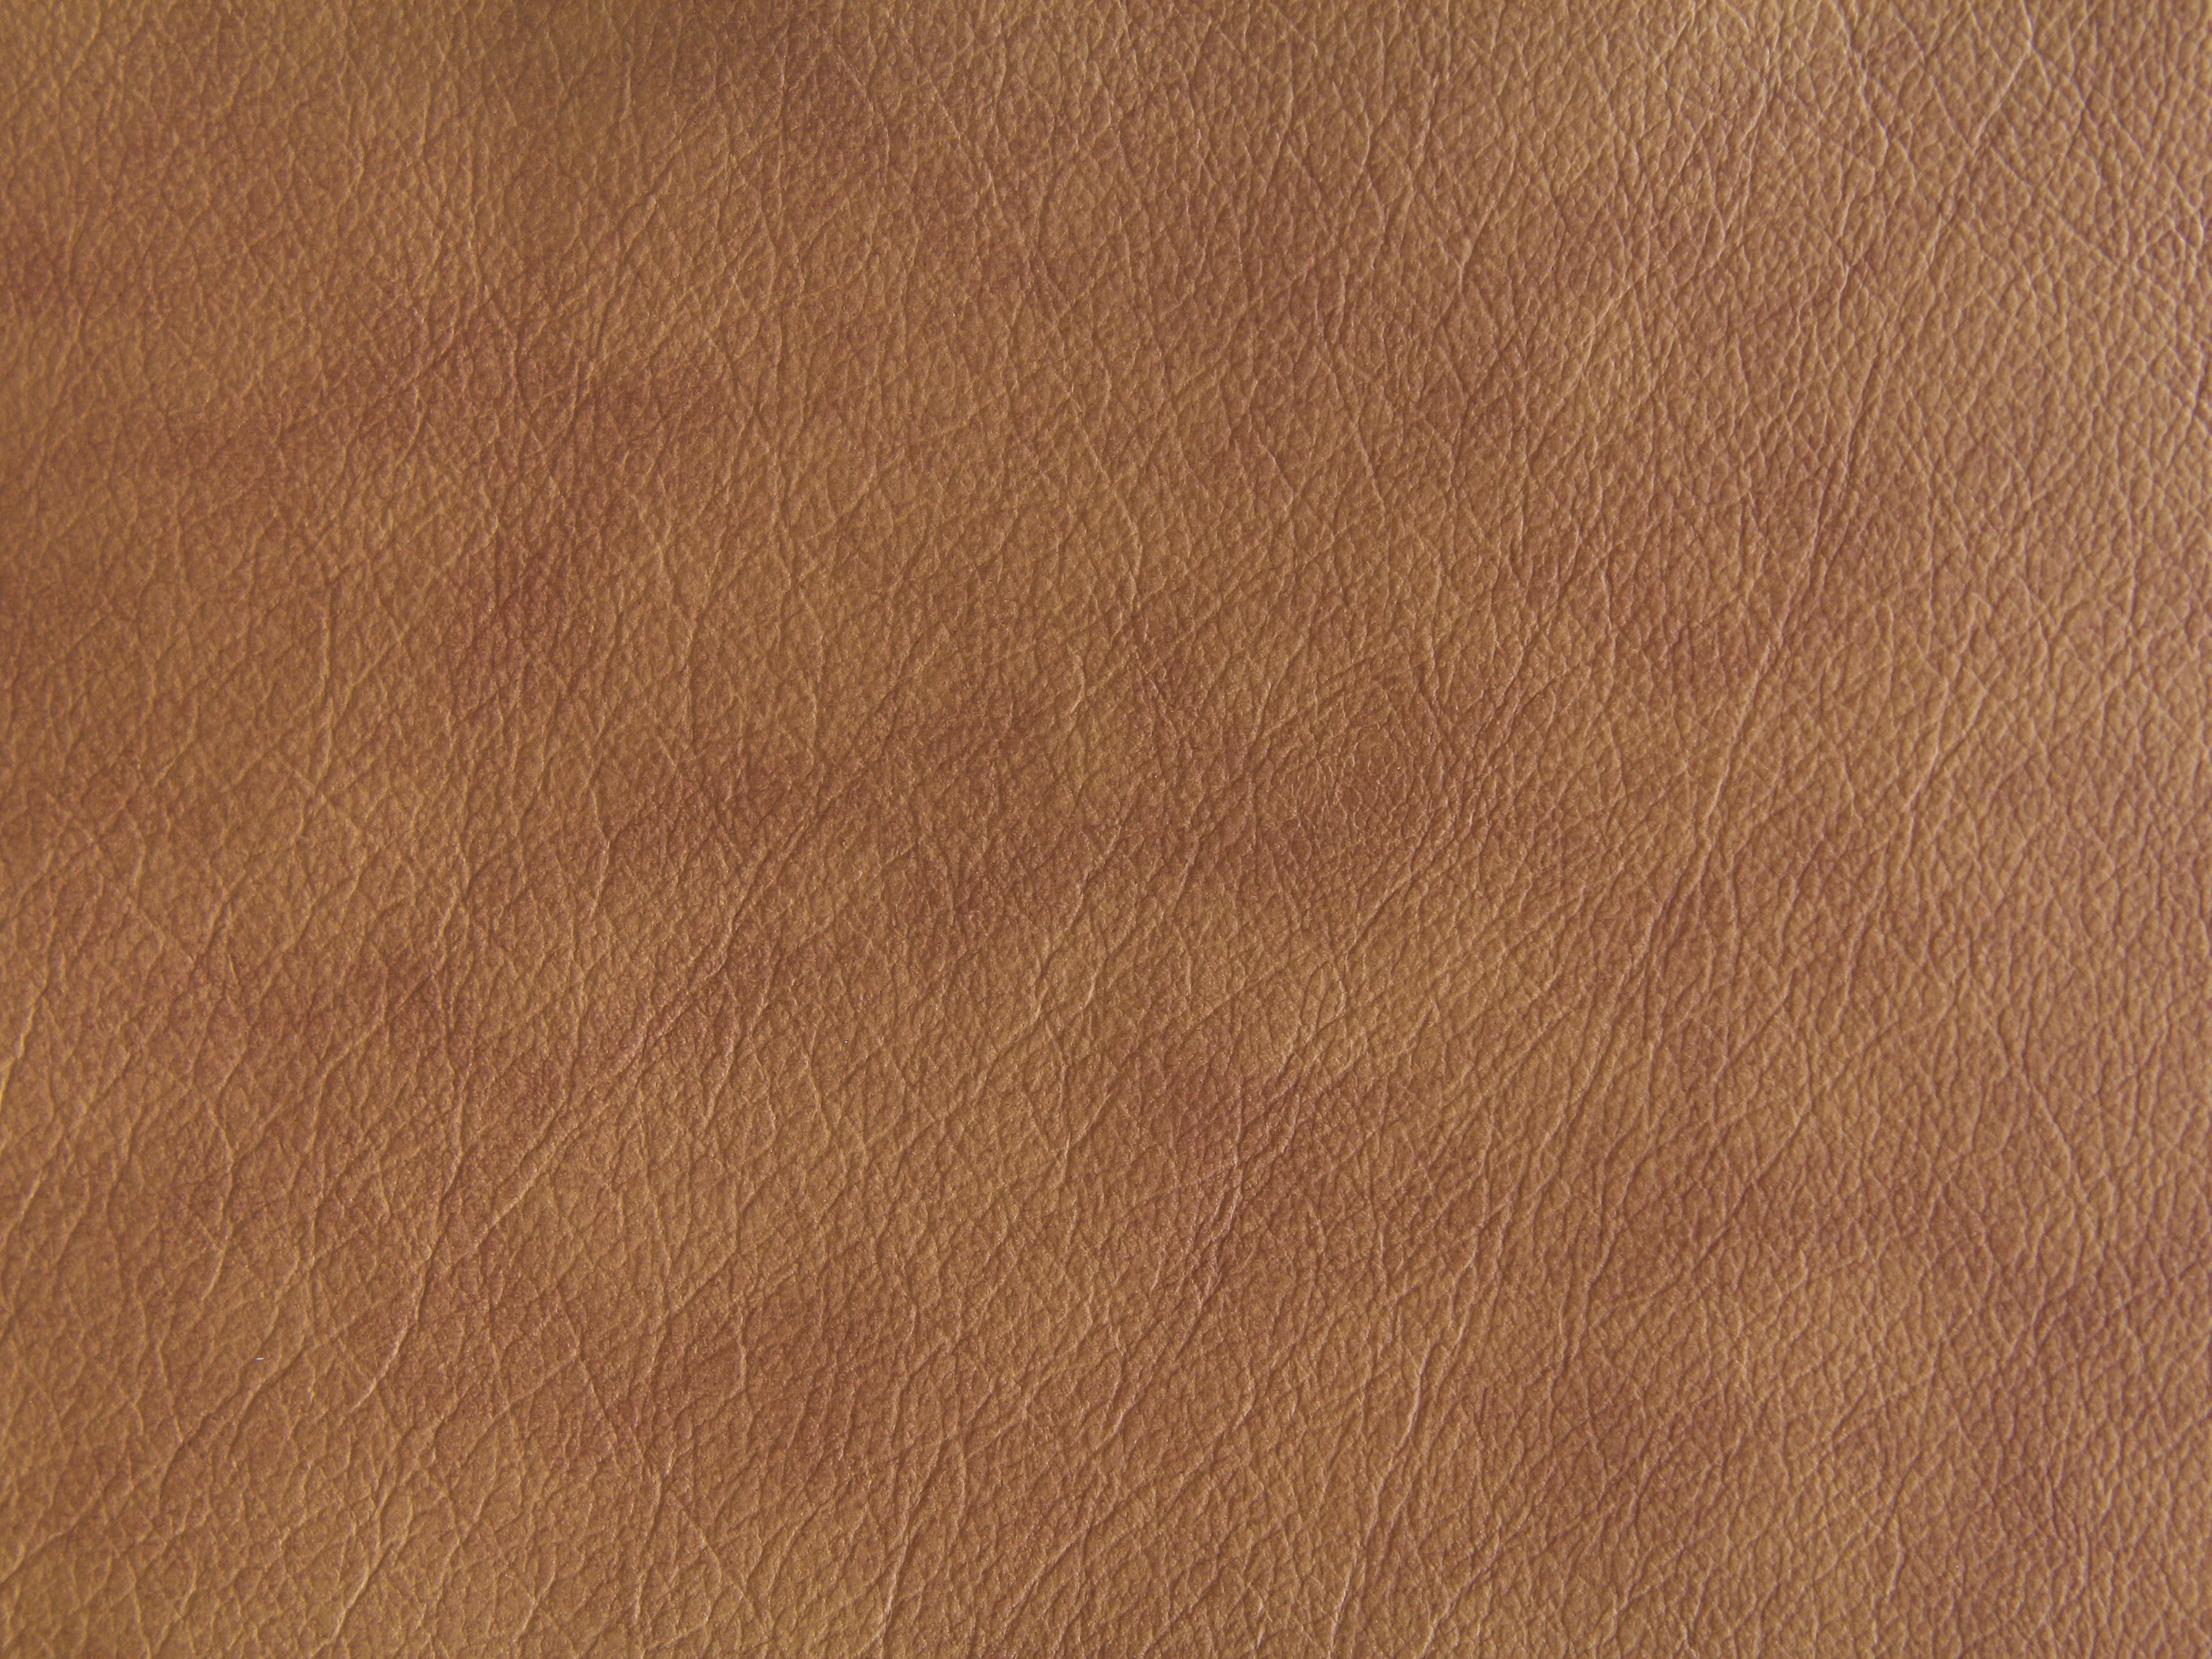 Coudy Brown Leather Texture Wallpaper Fabric Stock Image HD Wallpapers Download Free Images Wallpaper [wallpaper981.blogspot.com]